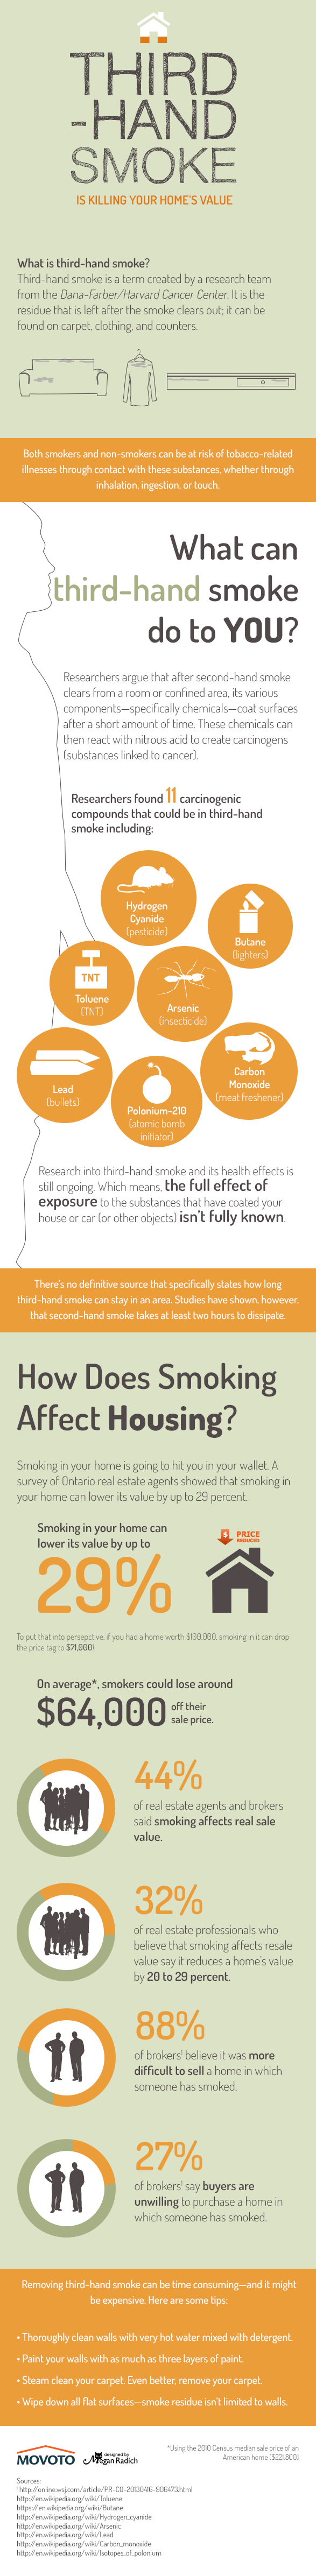 How Third-Hand Smoke Ruins Your House